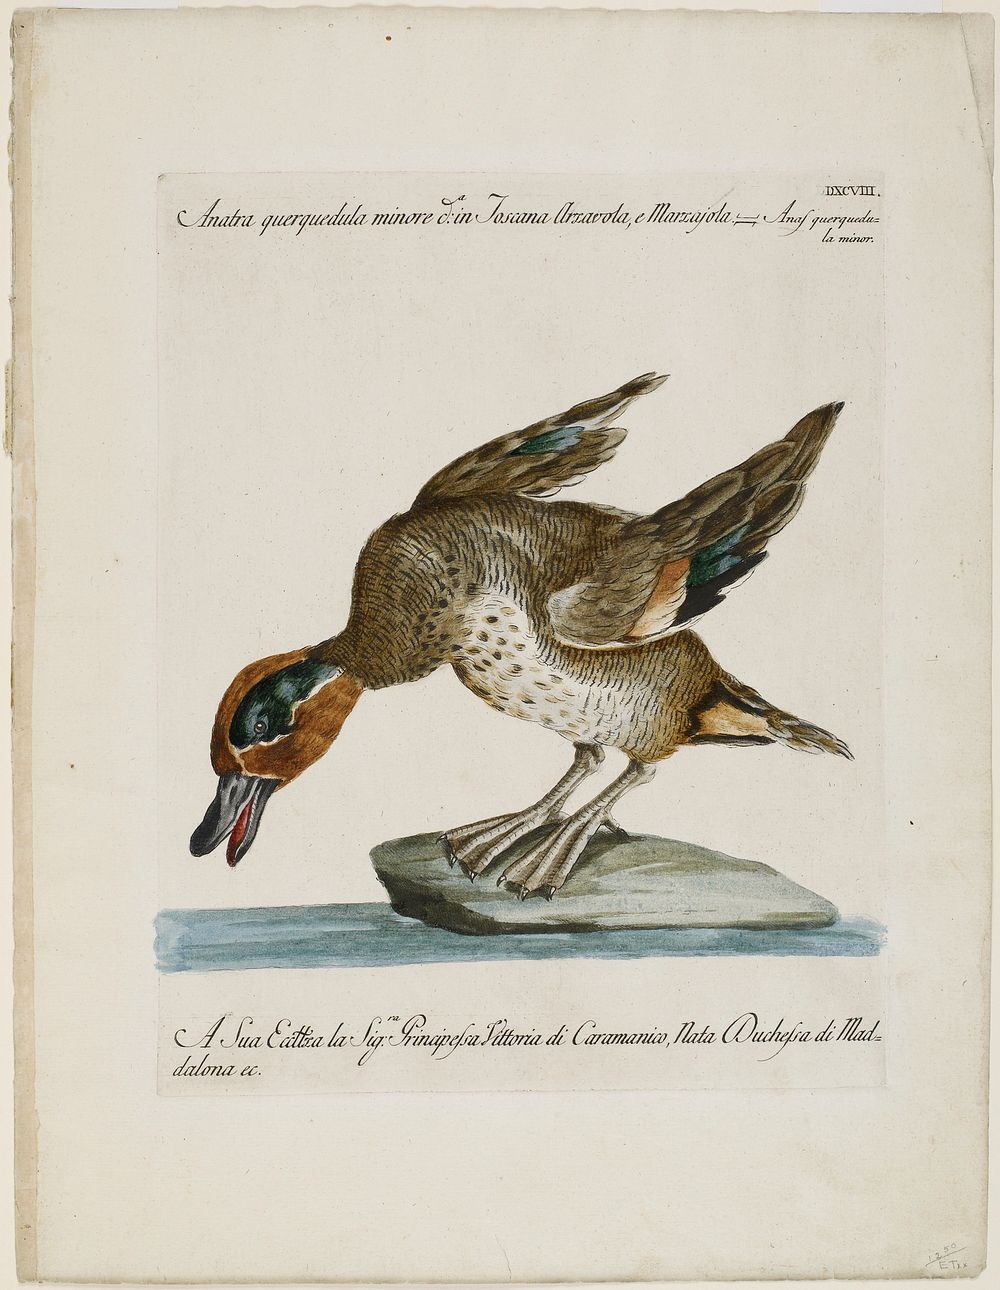 duck, leaning forward, standing on a rock; brown head with green around eyes; text at top and bottom. Original from the…